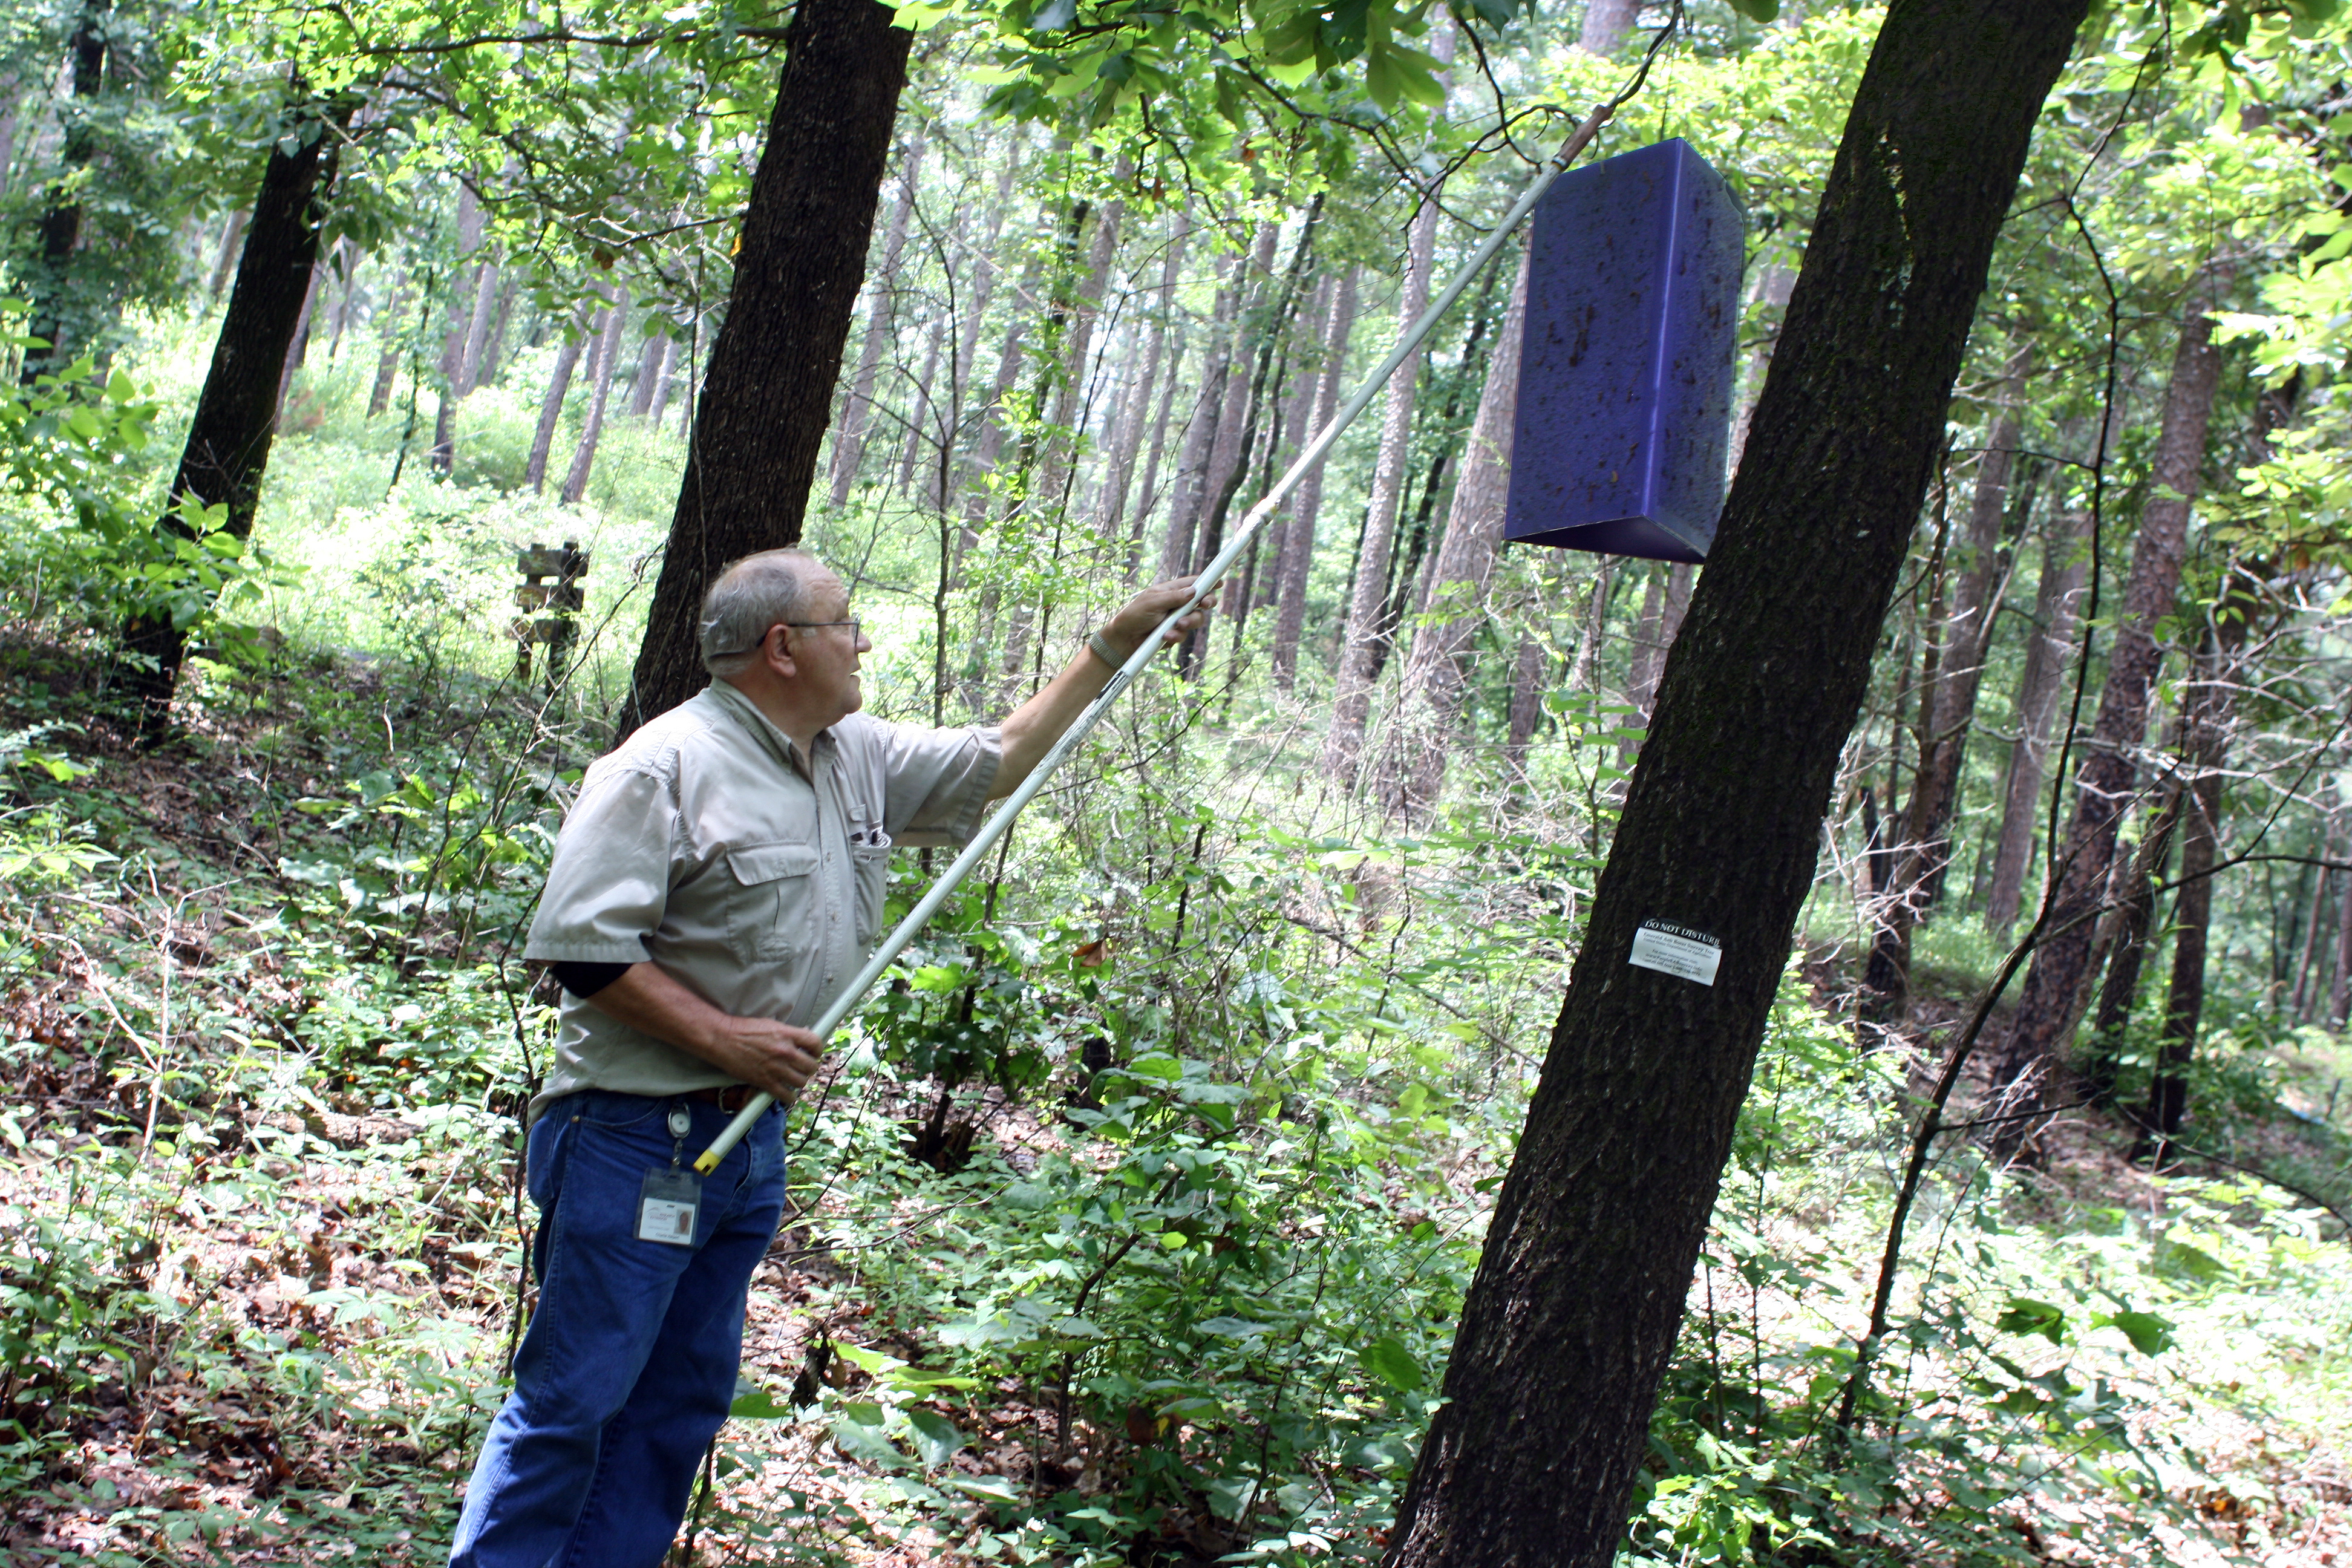 AgriLife Extension employee, Dr. Charlie Helpert, checks one of the emerald ash borer traps in an east Texas park